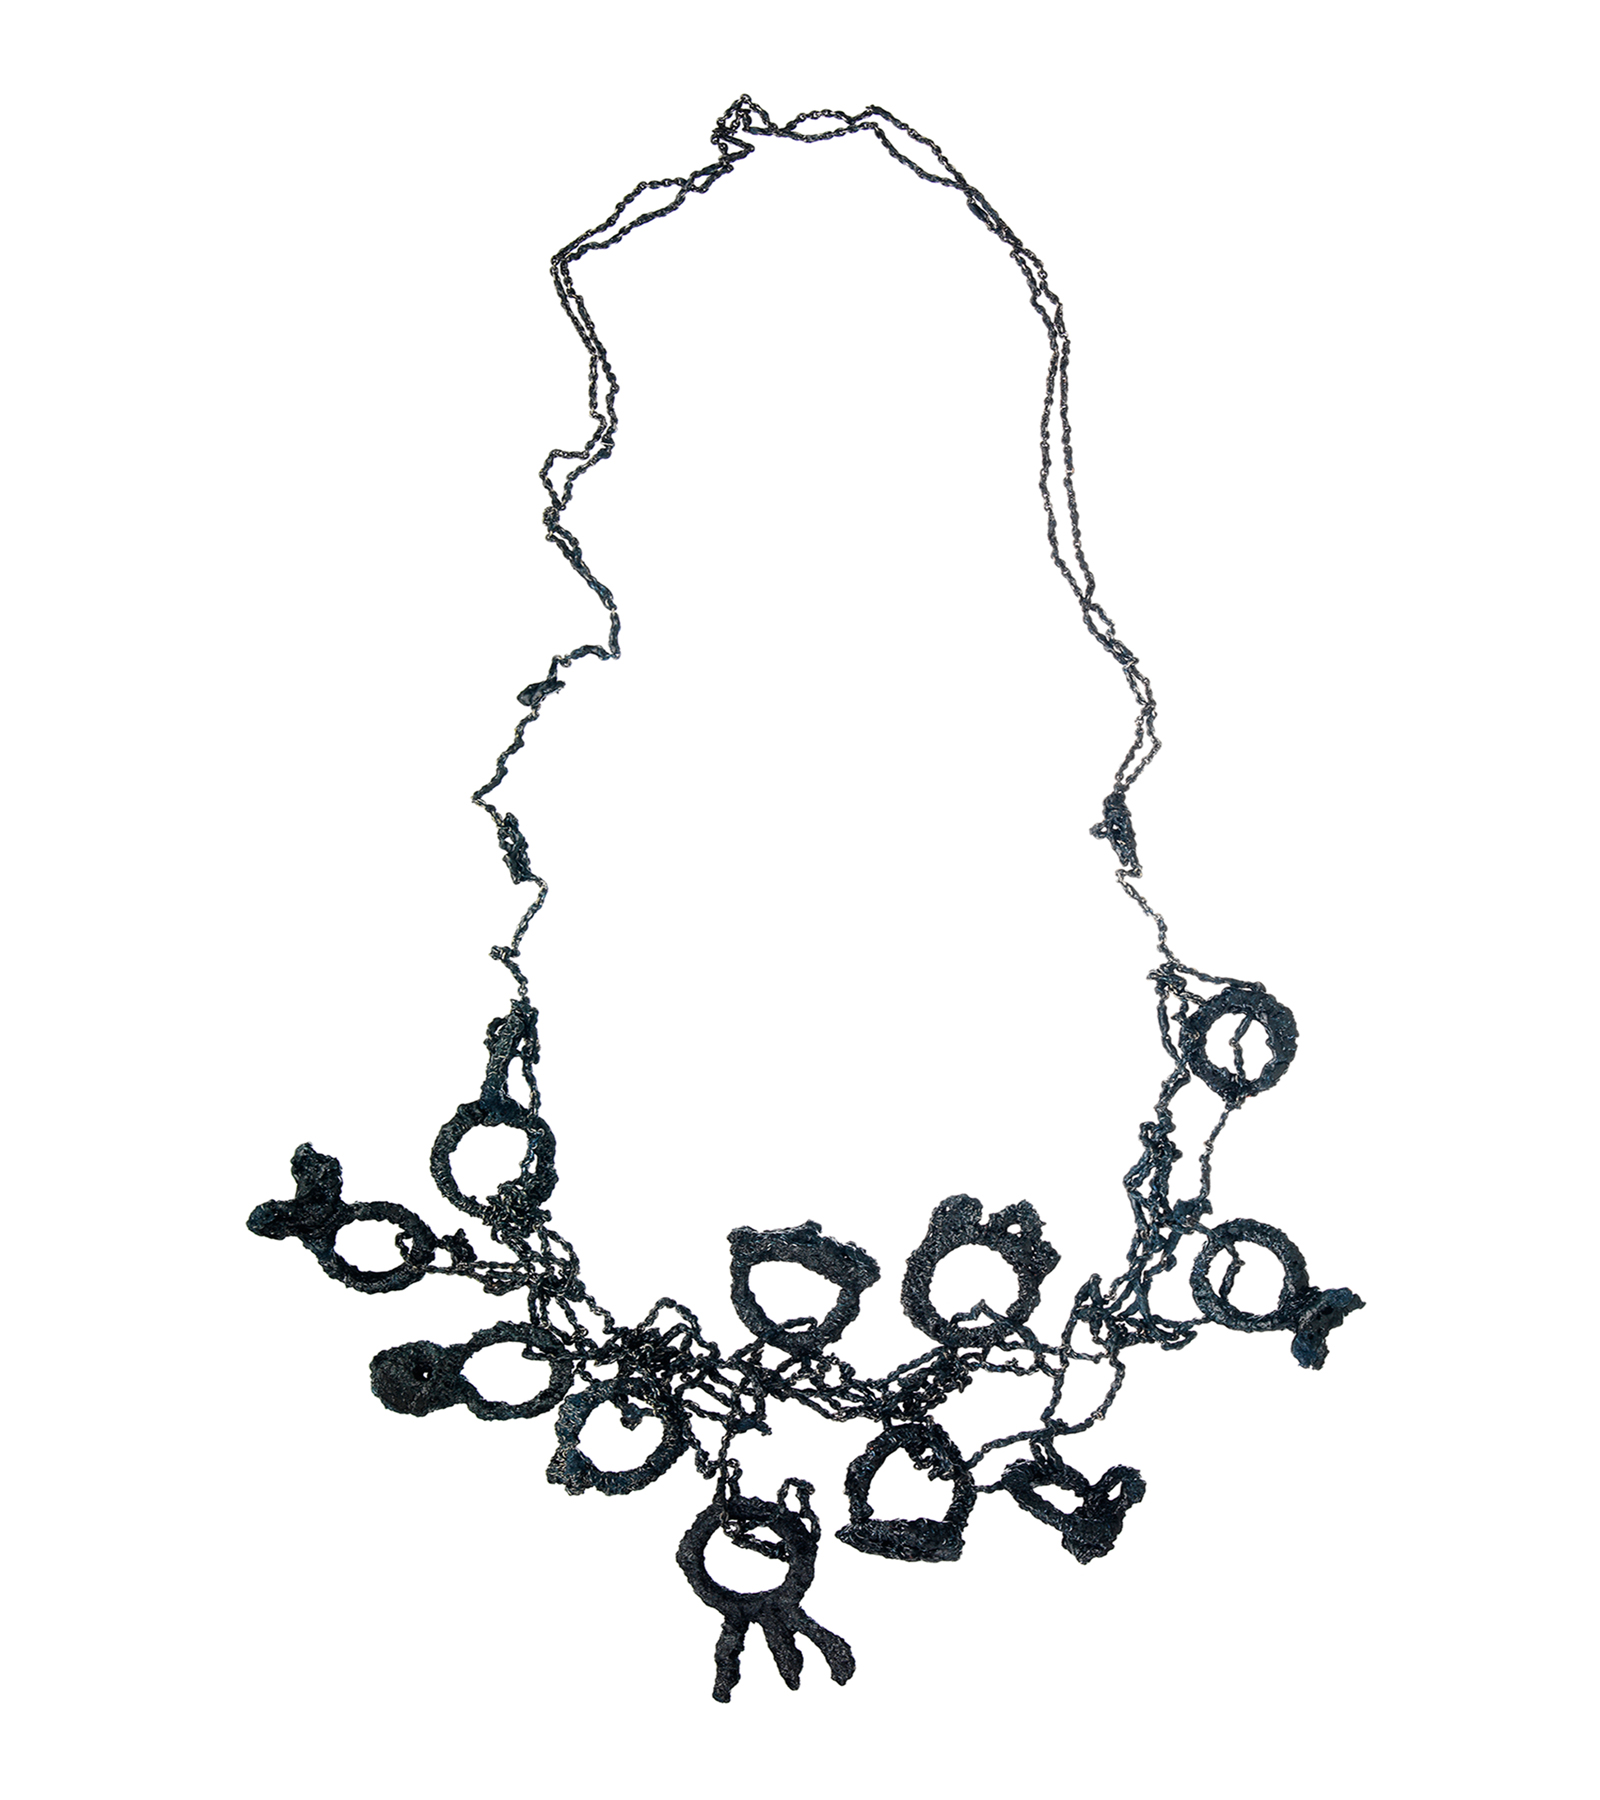 Shades of Black Ring Necklace, 2015